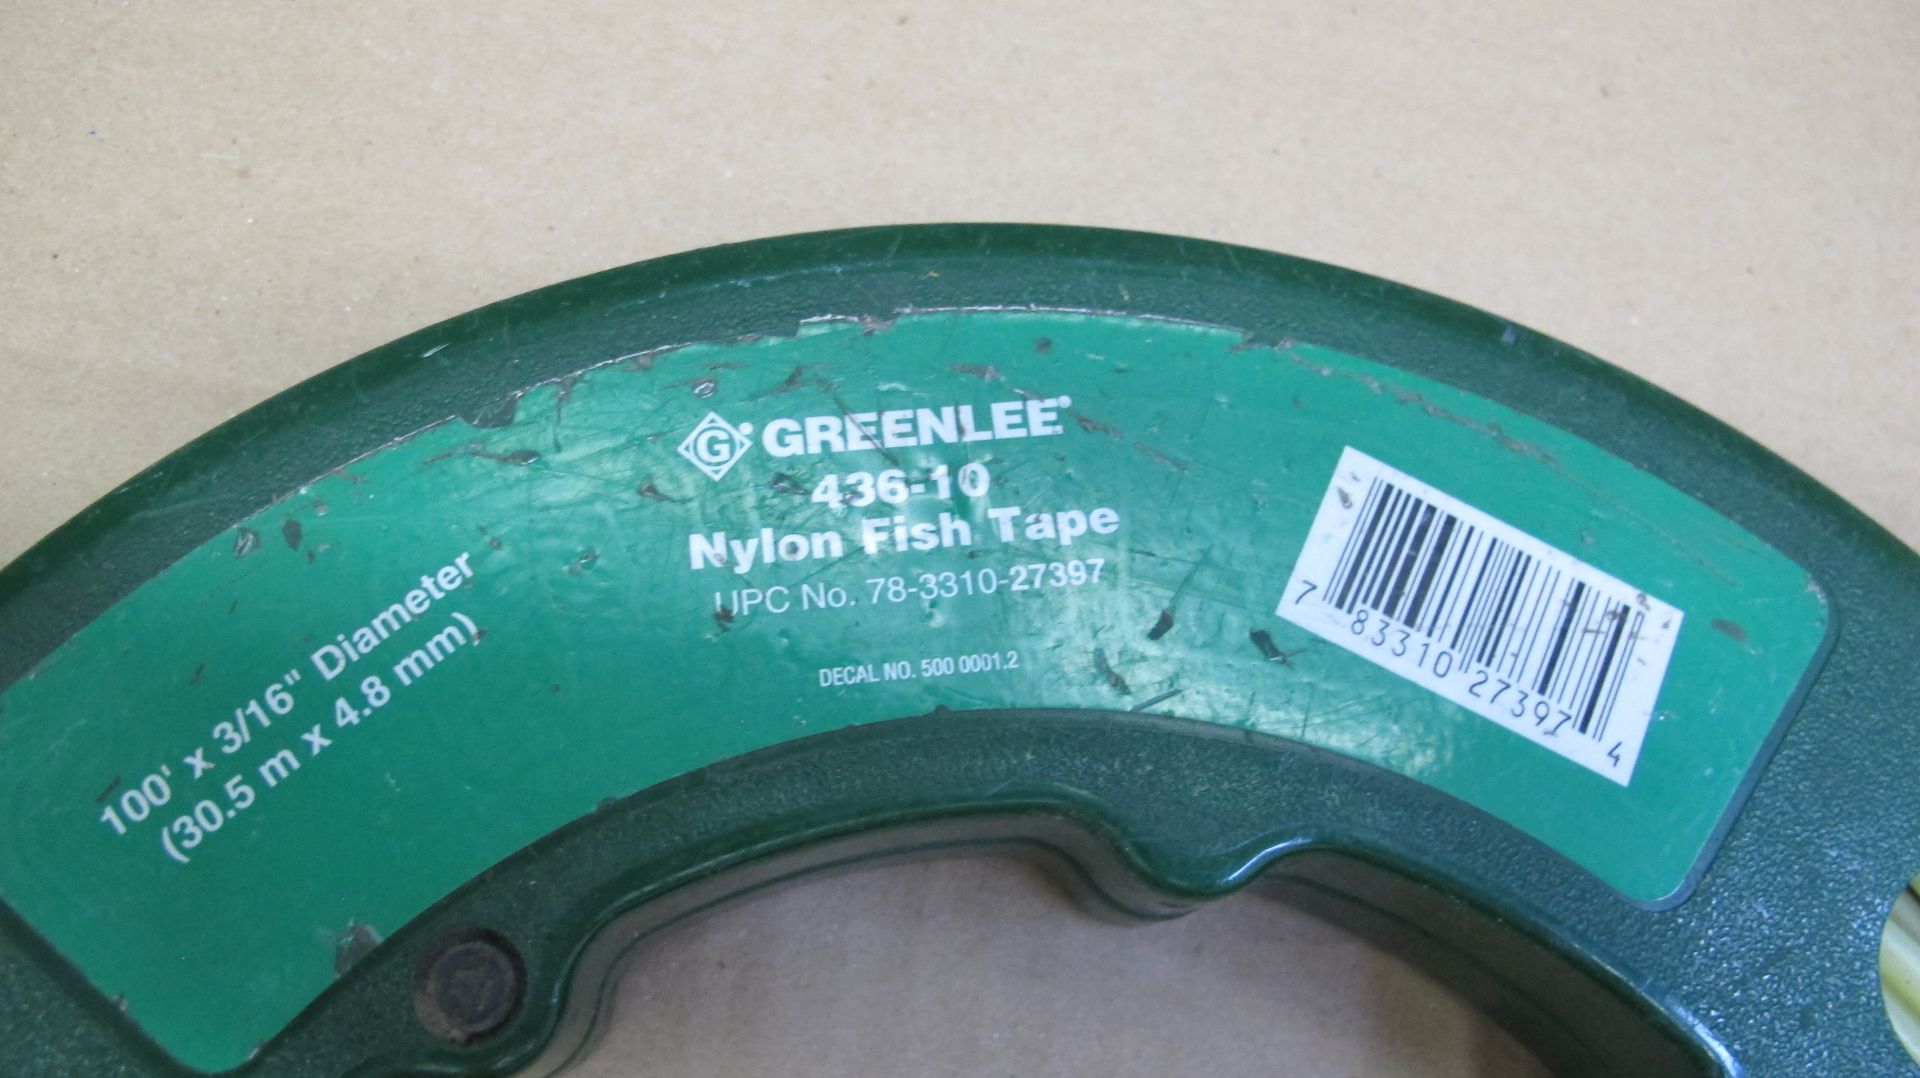 LOT OF GREENLEE 436-10 NYLON FISH TAPE 100' X 3/16" DIA., GREENLEE FTS438-246 STEEL FISH TAPE 240' X - Image 2 of 4